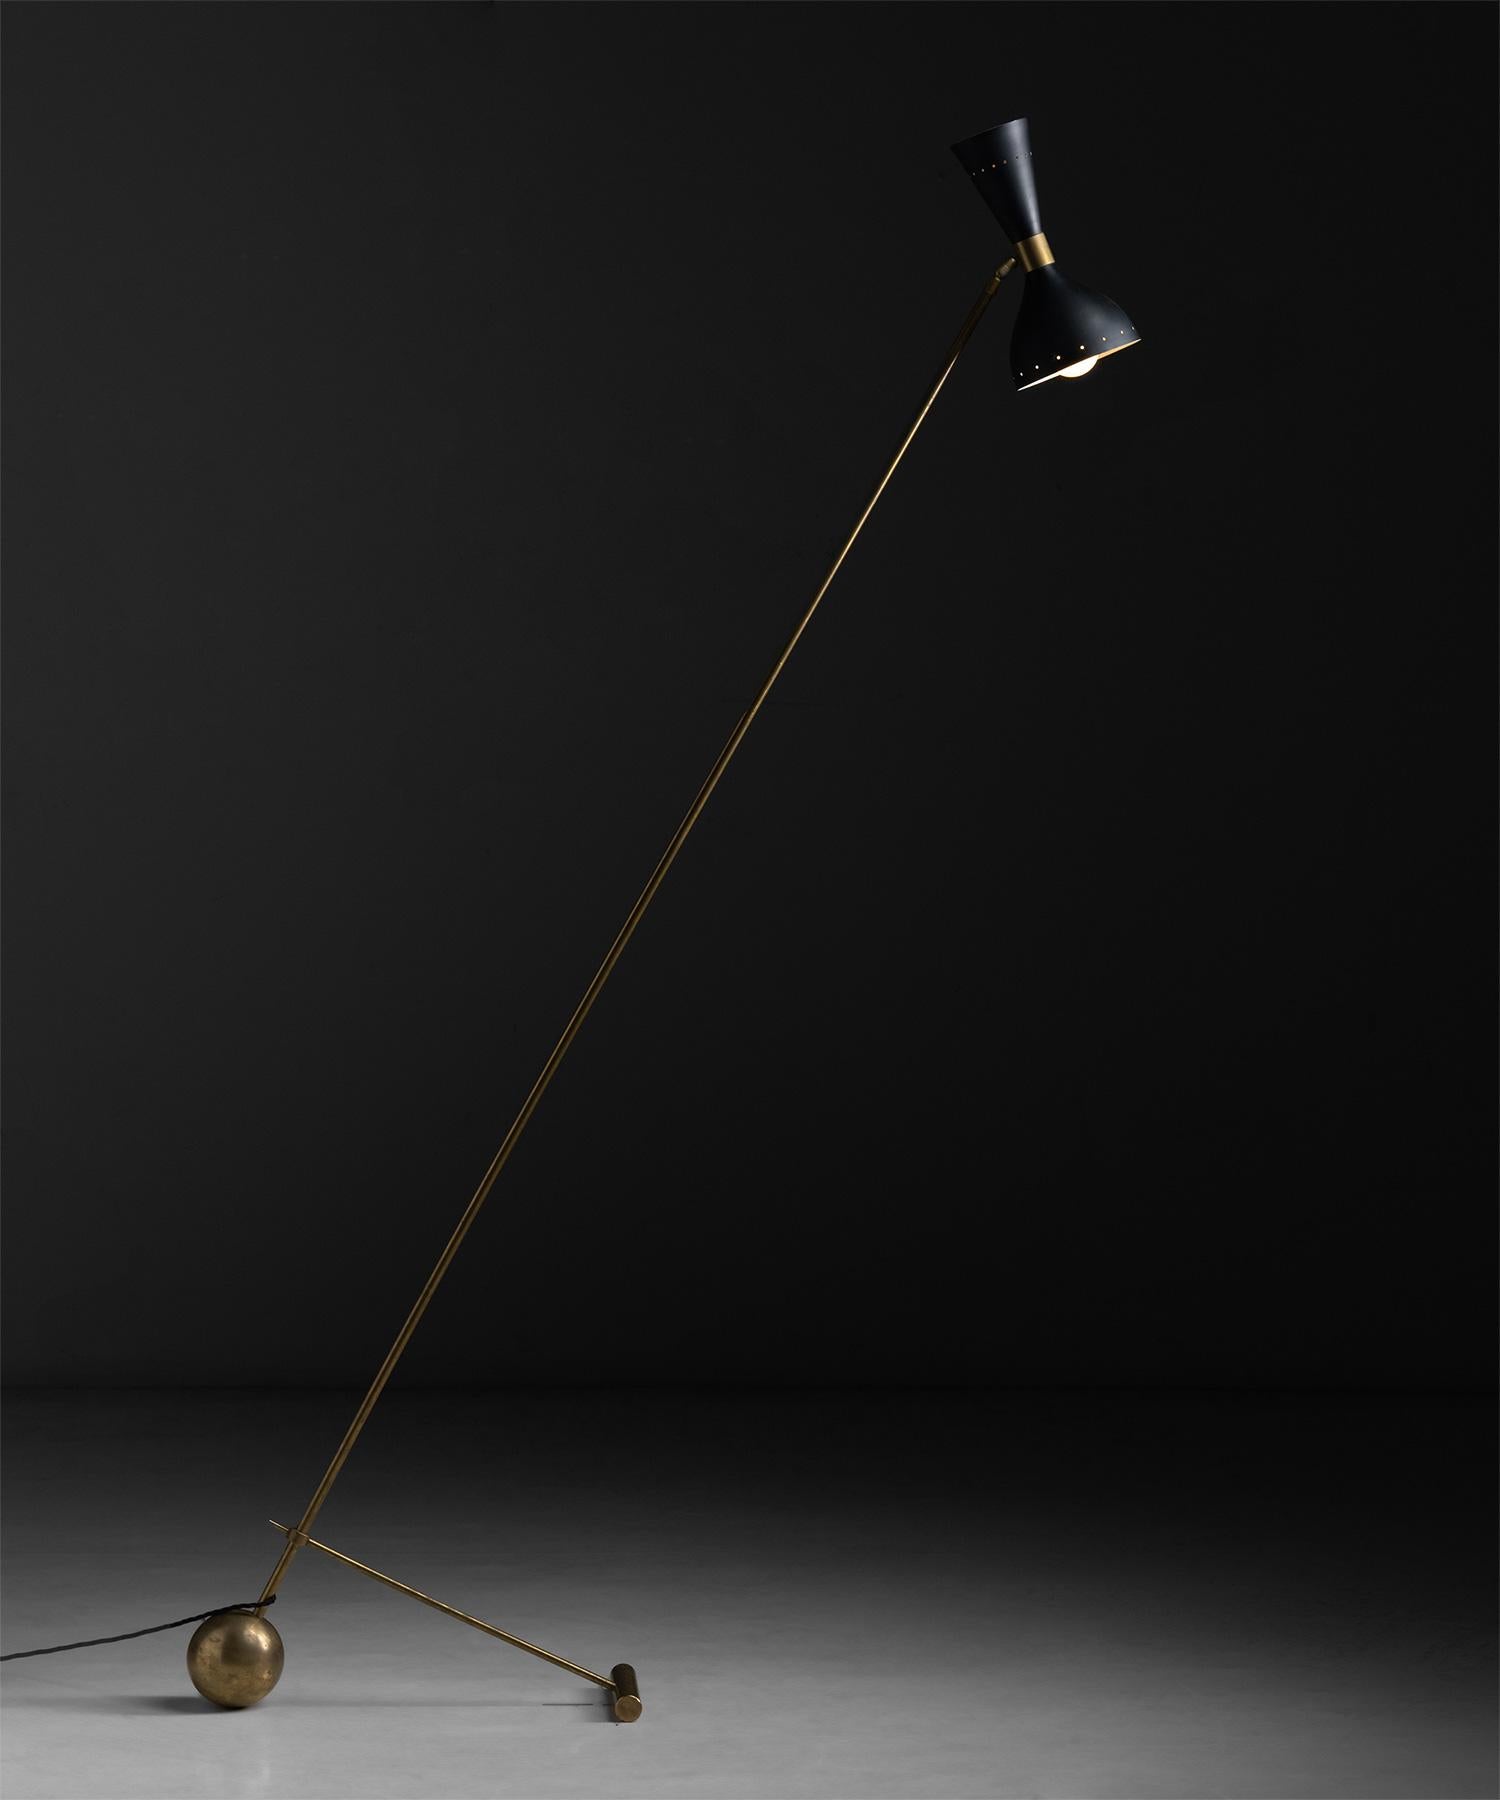 70 inch Tall Stilnovo floor lamp

Italy circa 1950

Articulating black shade on brass counterbalanced stand.

Measures: 8